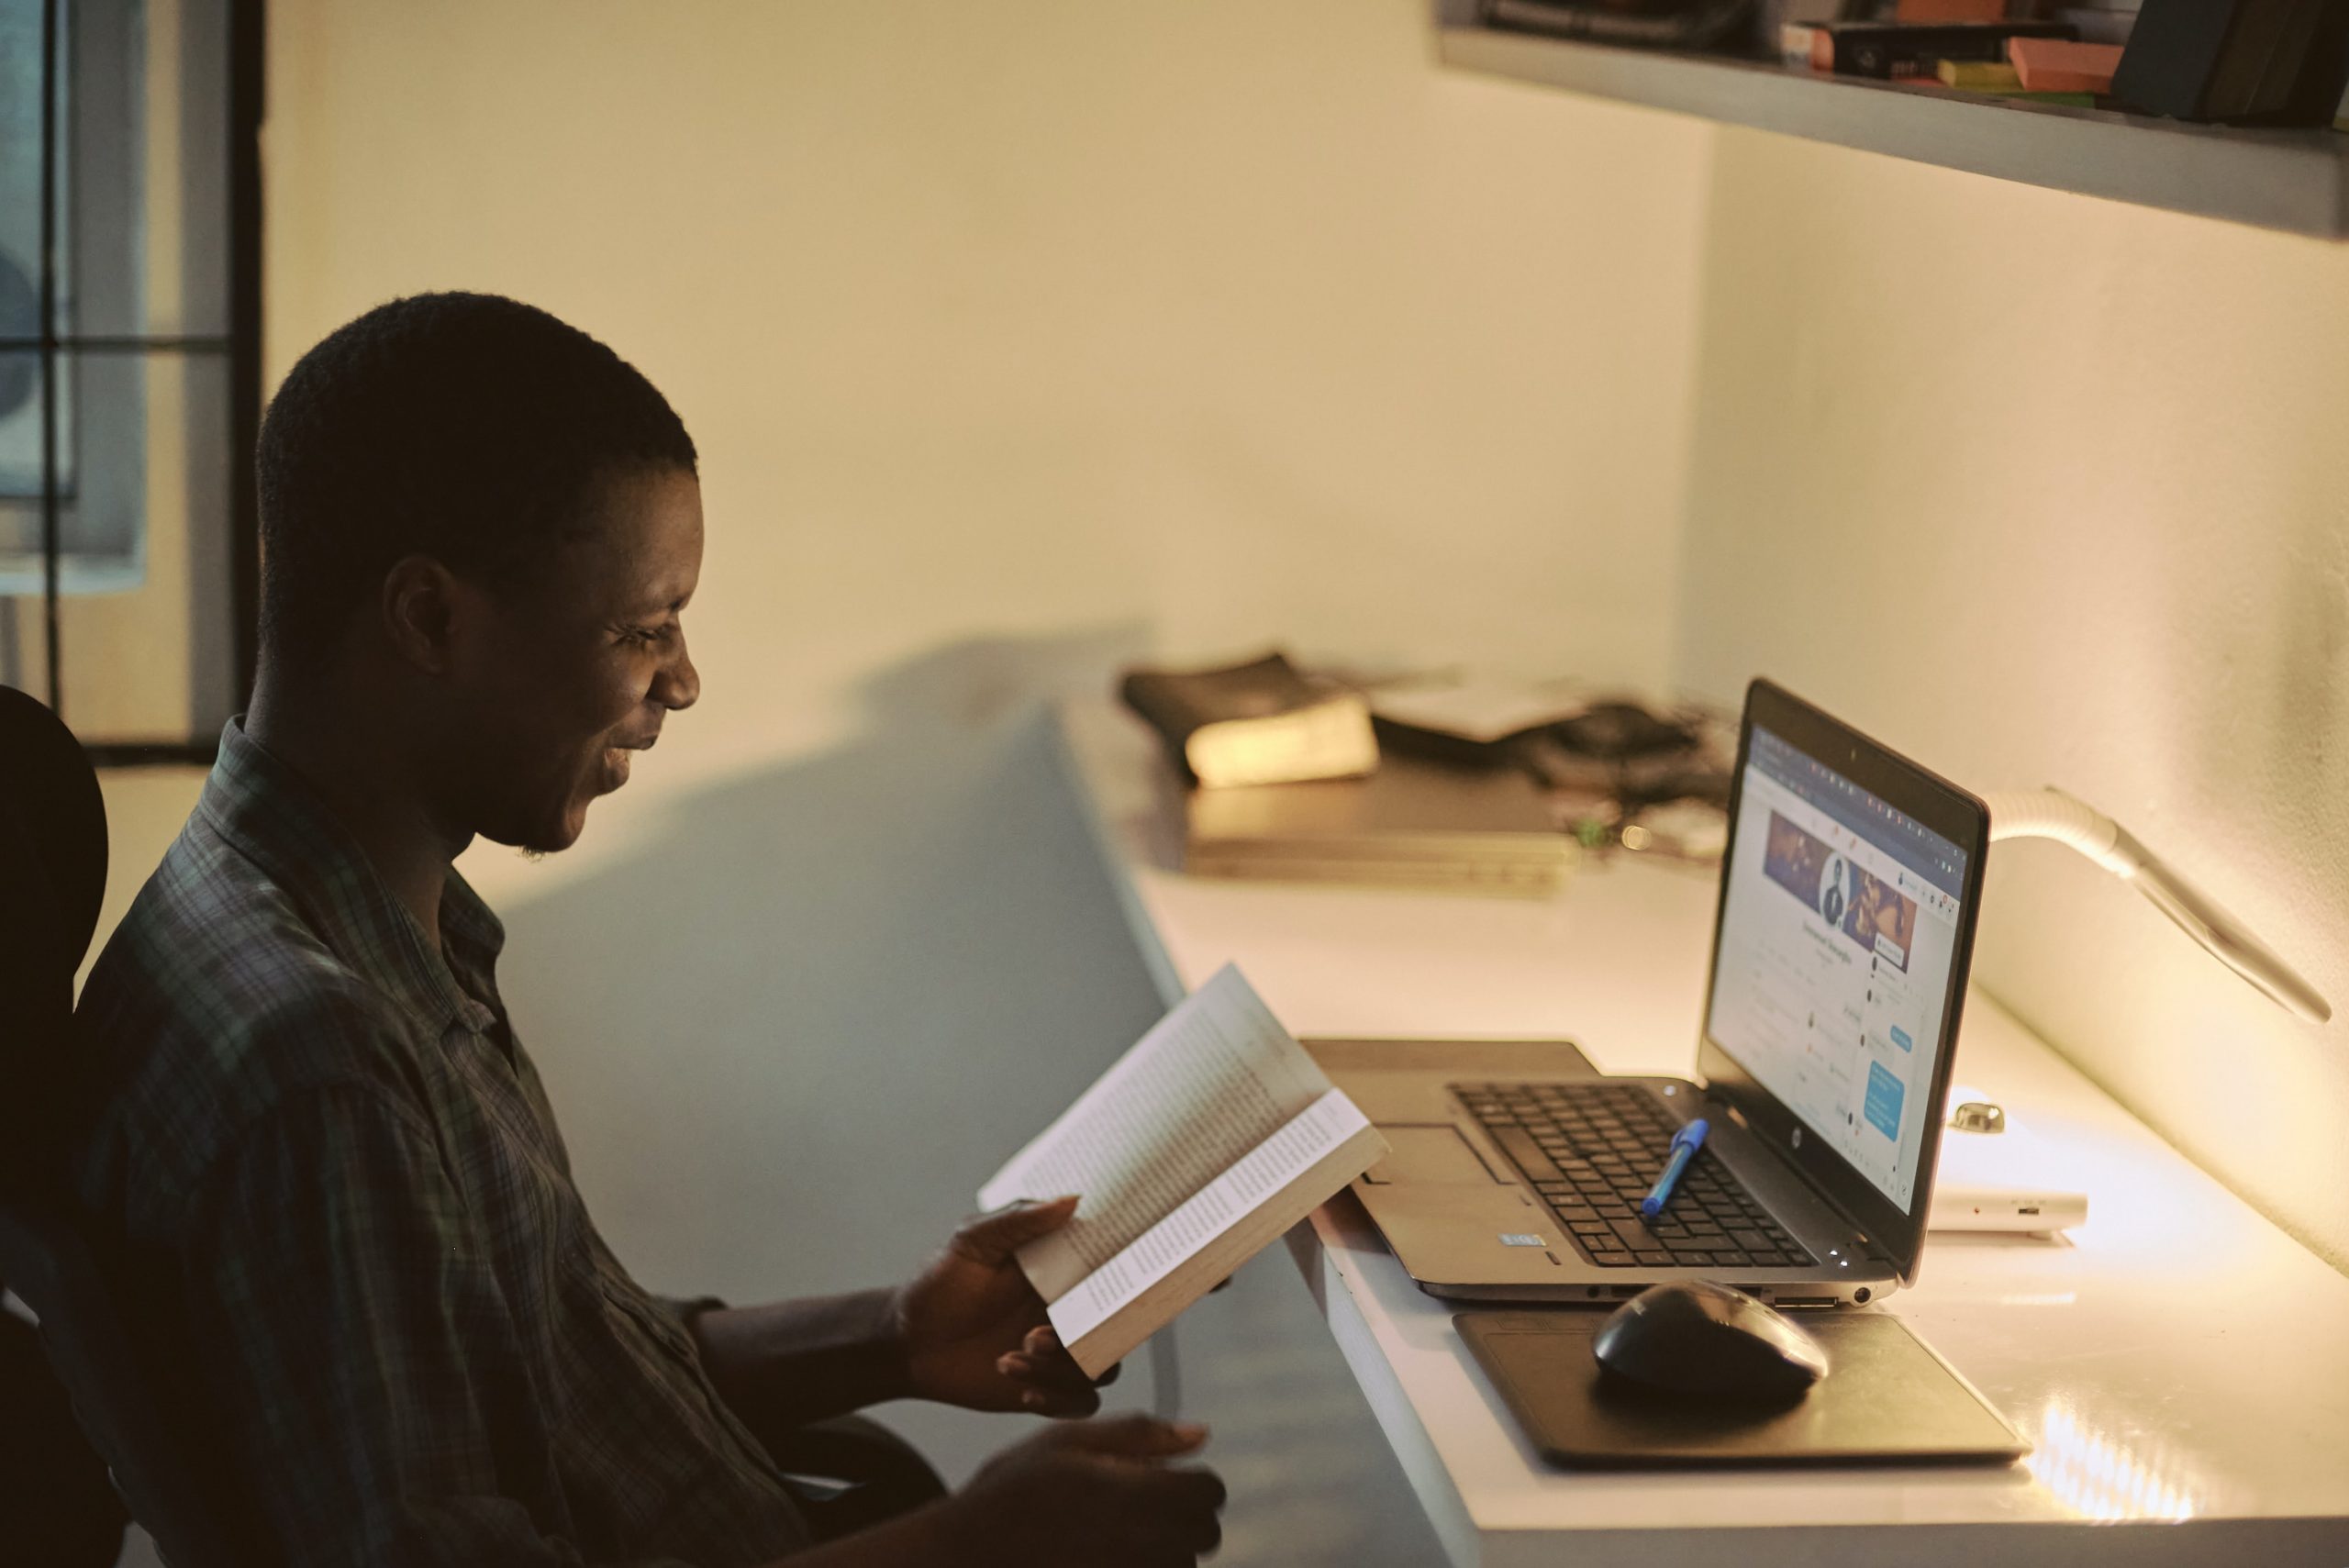 Black man contently sits in front of open laptop with open book learning.